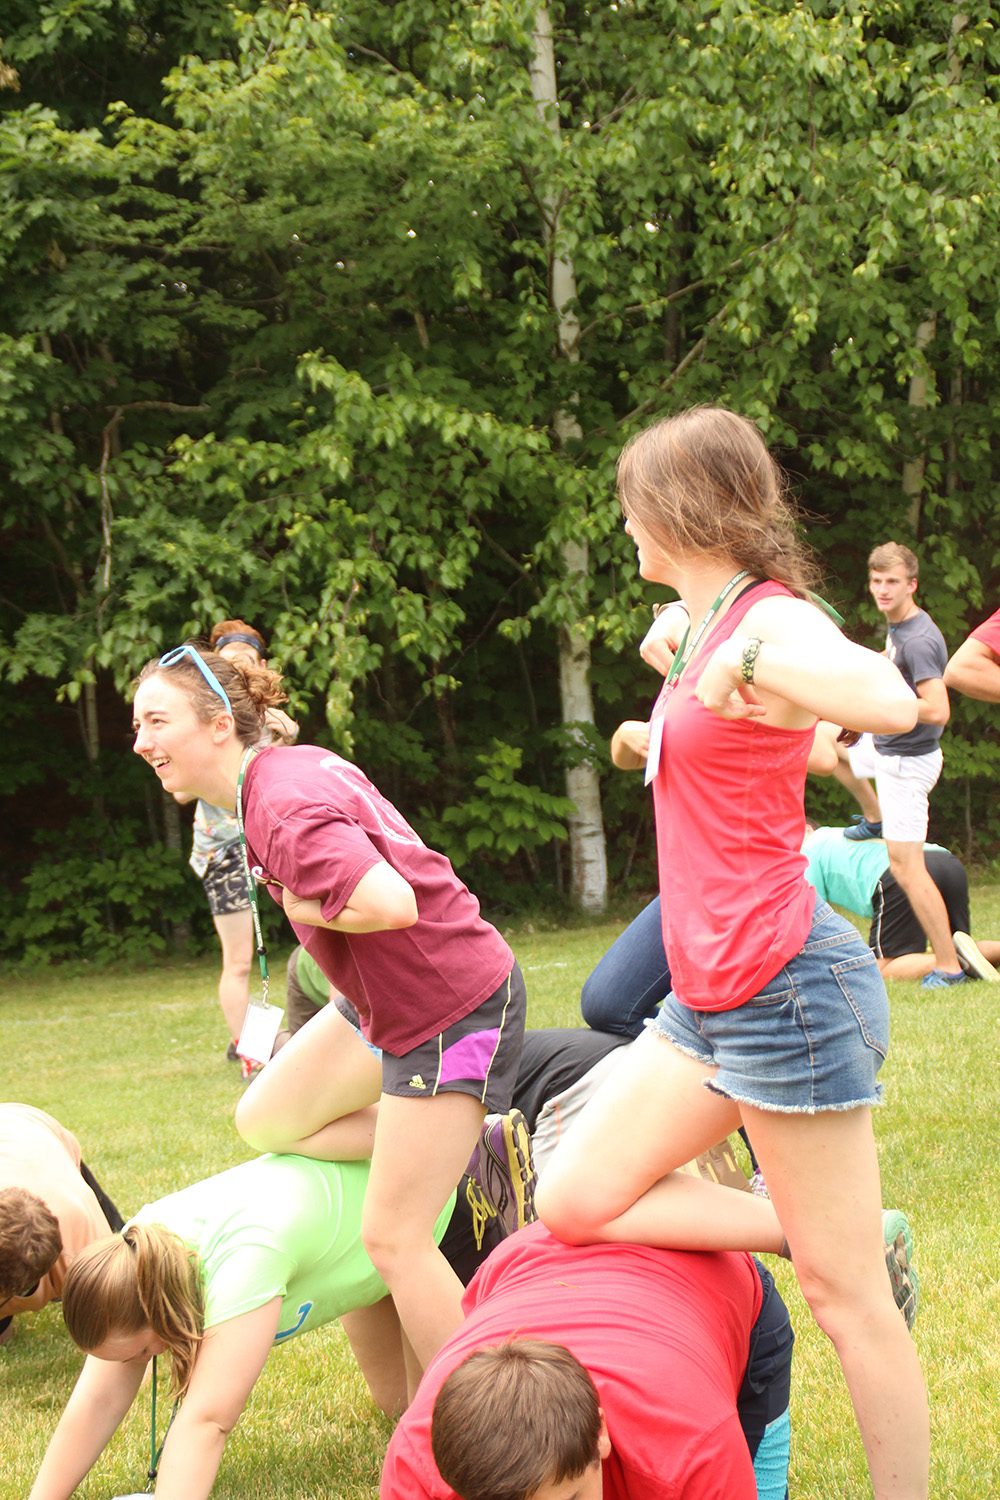 A team building exercise at a camp retreat.